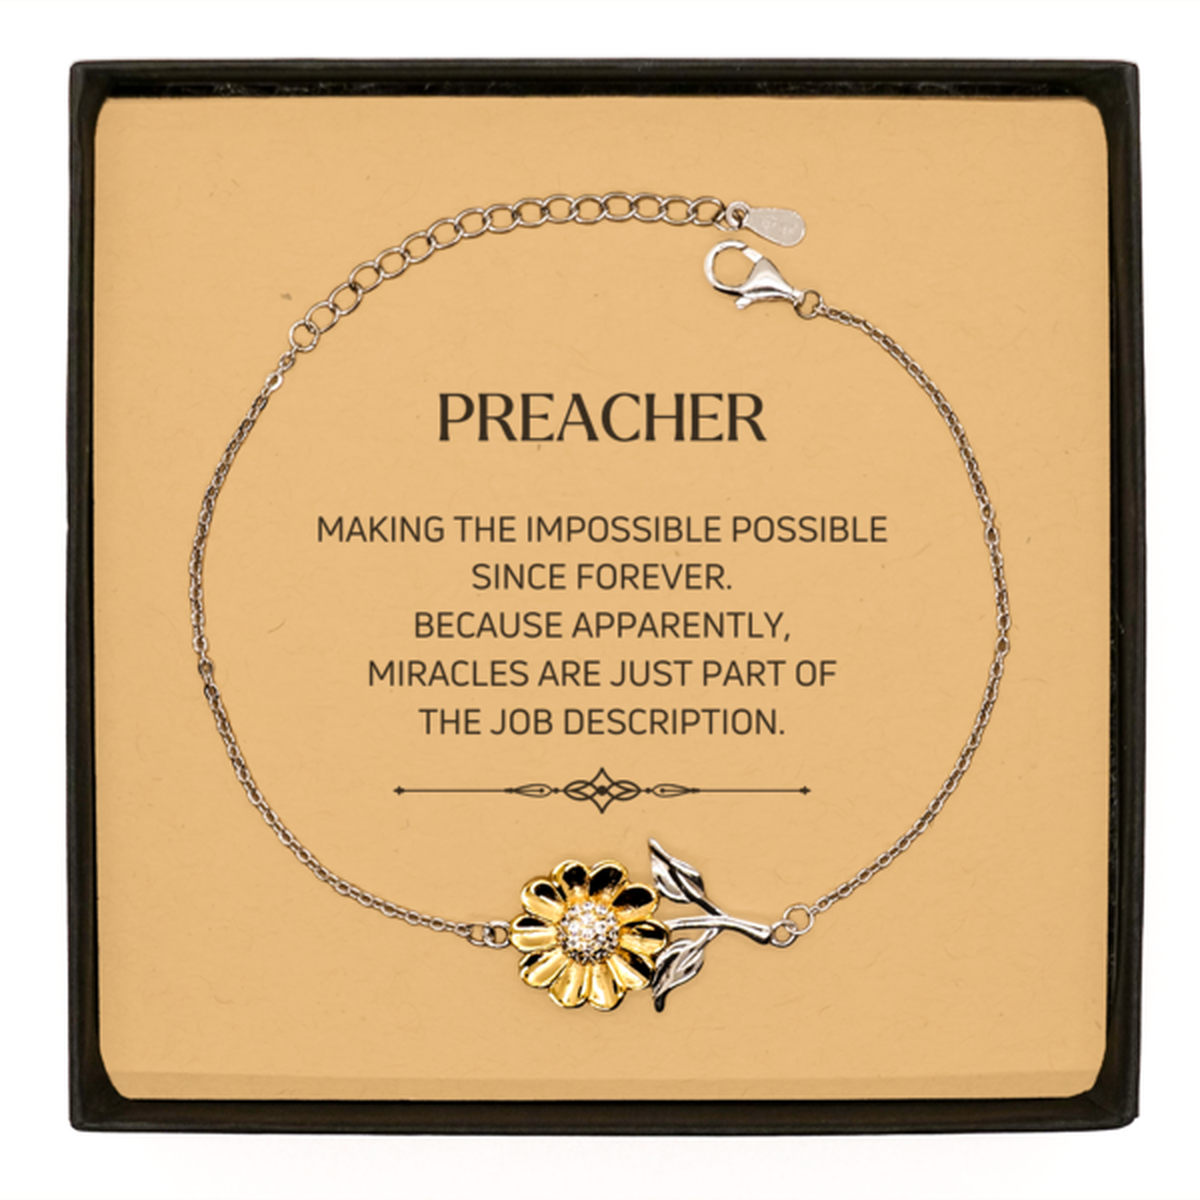 Funny Preacher Gifts, Miracles are just part of the job description, Inspirational Birthday Sunflower Bracelet For Preacher, Men, Women, Coworkers, Friends, Boss